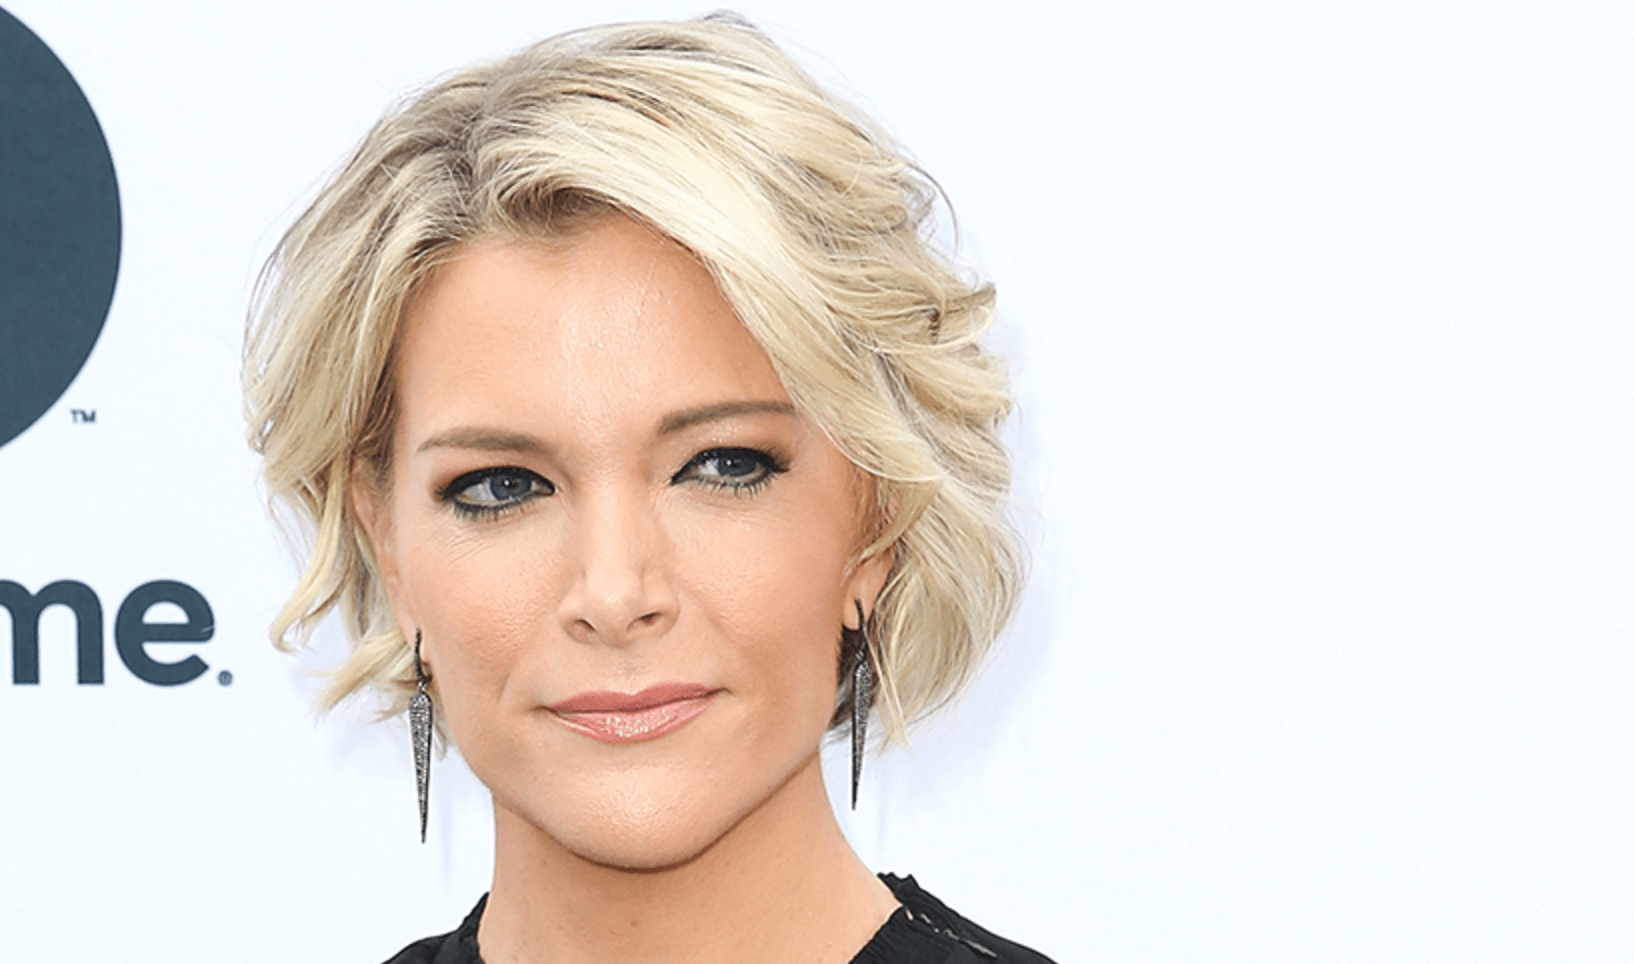 Megyn Kelly's Ratings Fall To Lowest Level Yet.